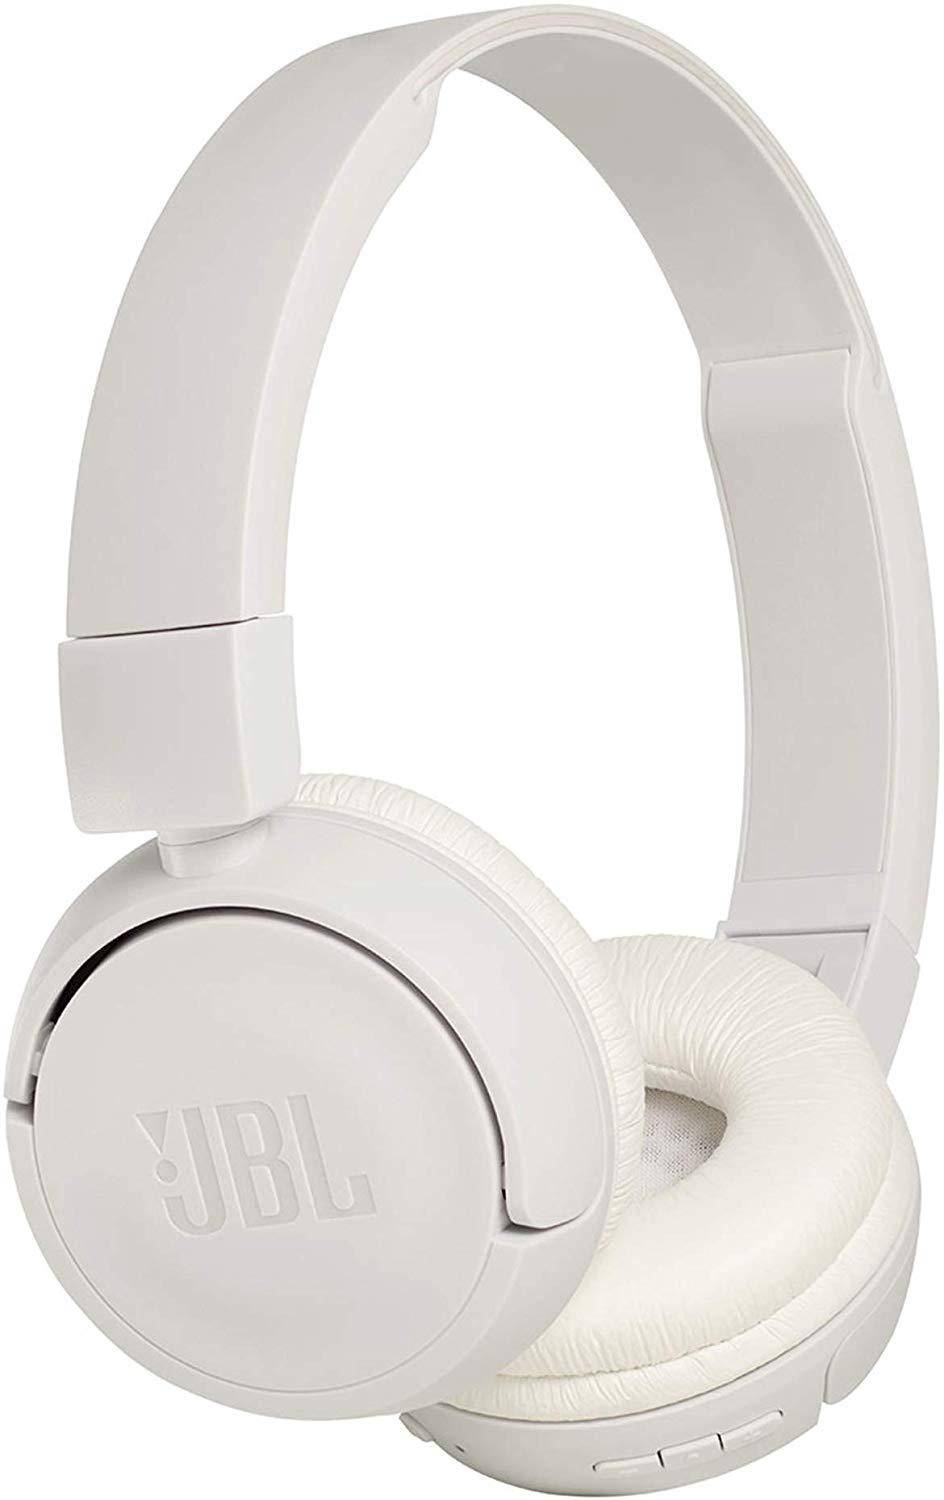 JBL T460BT ExtraBass Headphone with Mic (Wireless) zoom image